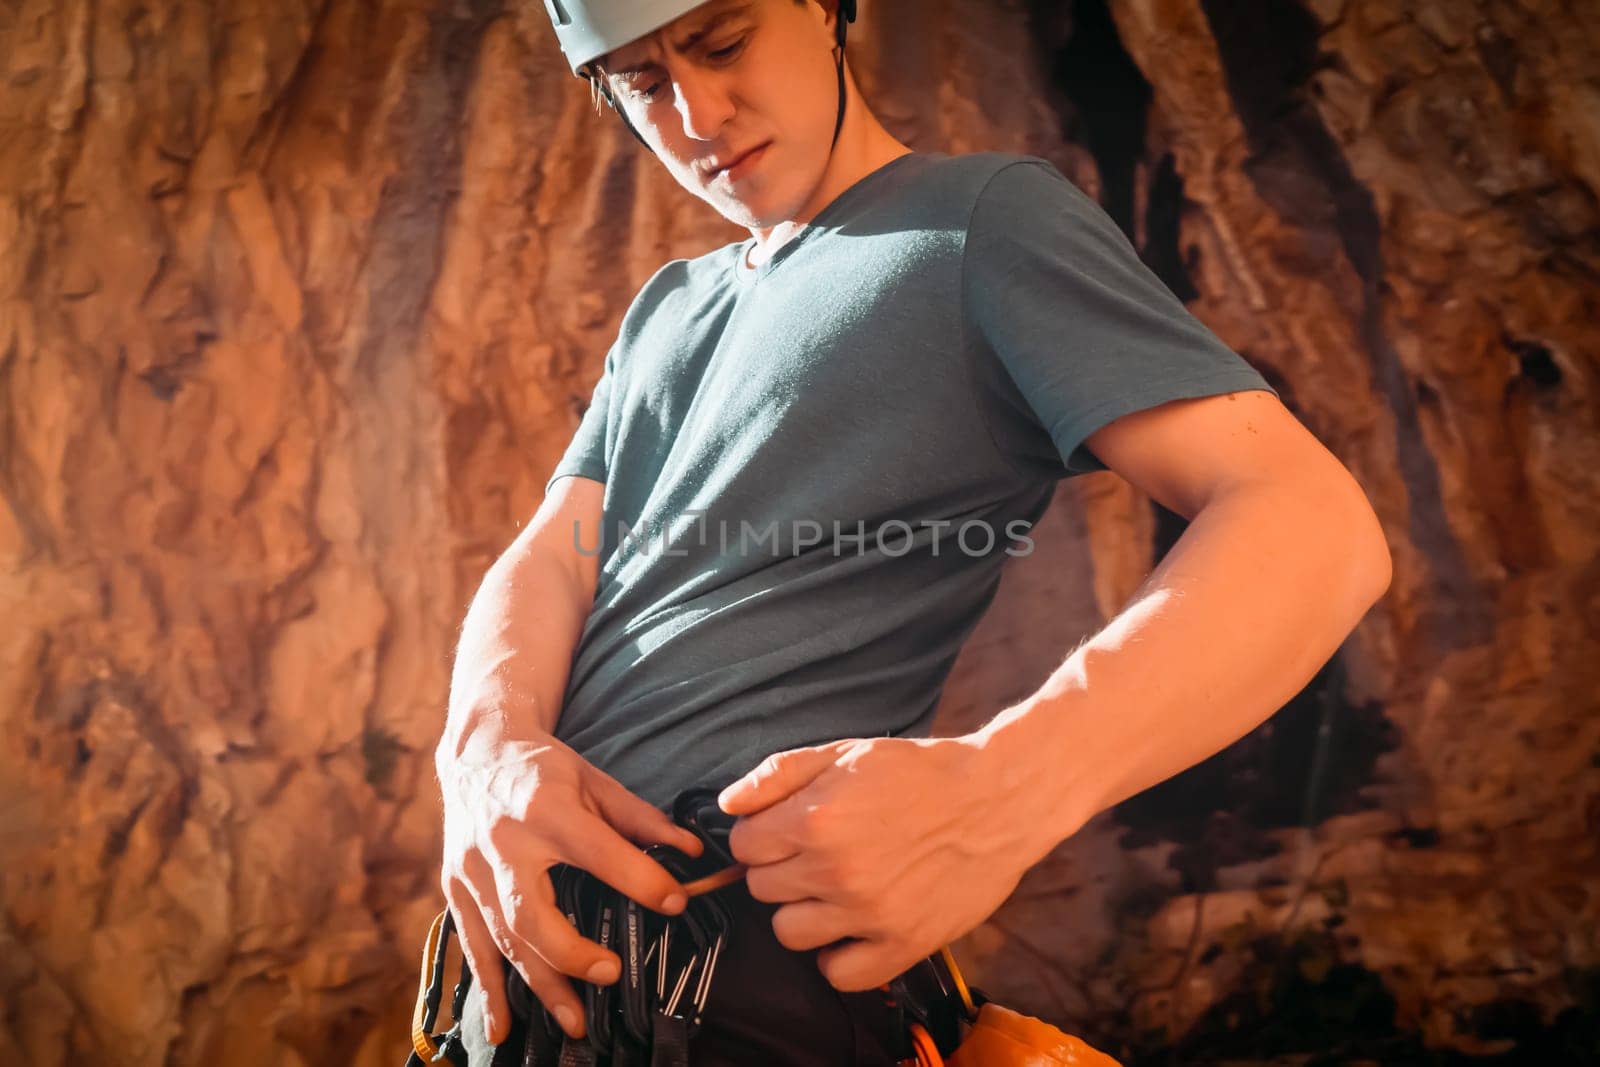 A man holds a carbine in his hand and fastens it to his climbing harness, the athlete is preparing for training on red rocks, is involved in active sports, rock climbing and mountaineering.